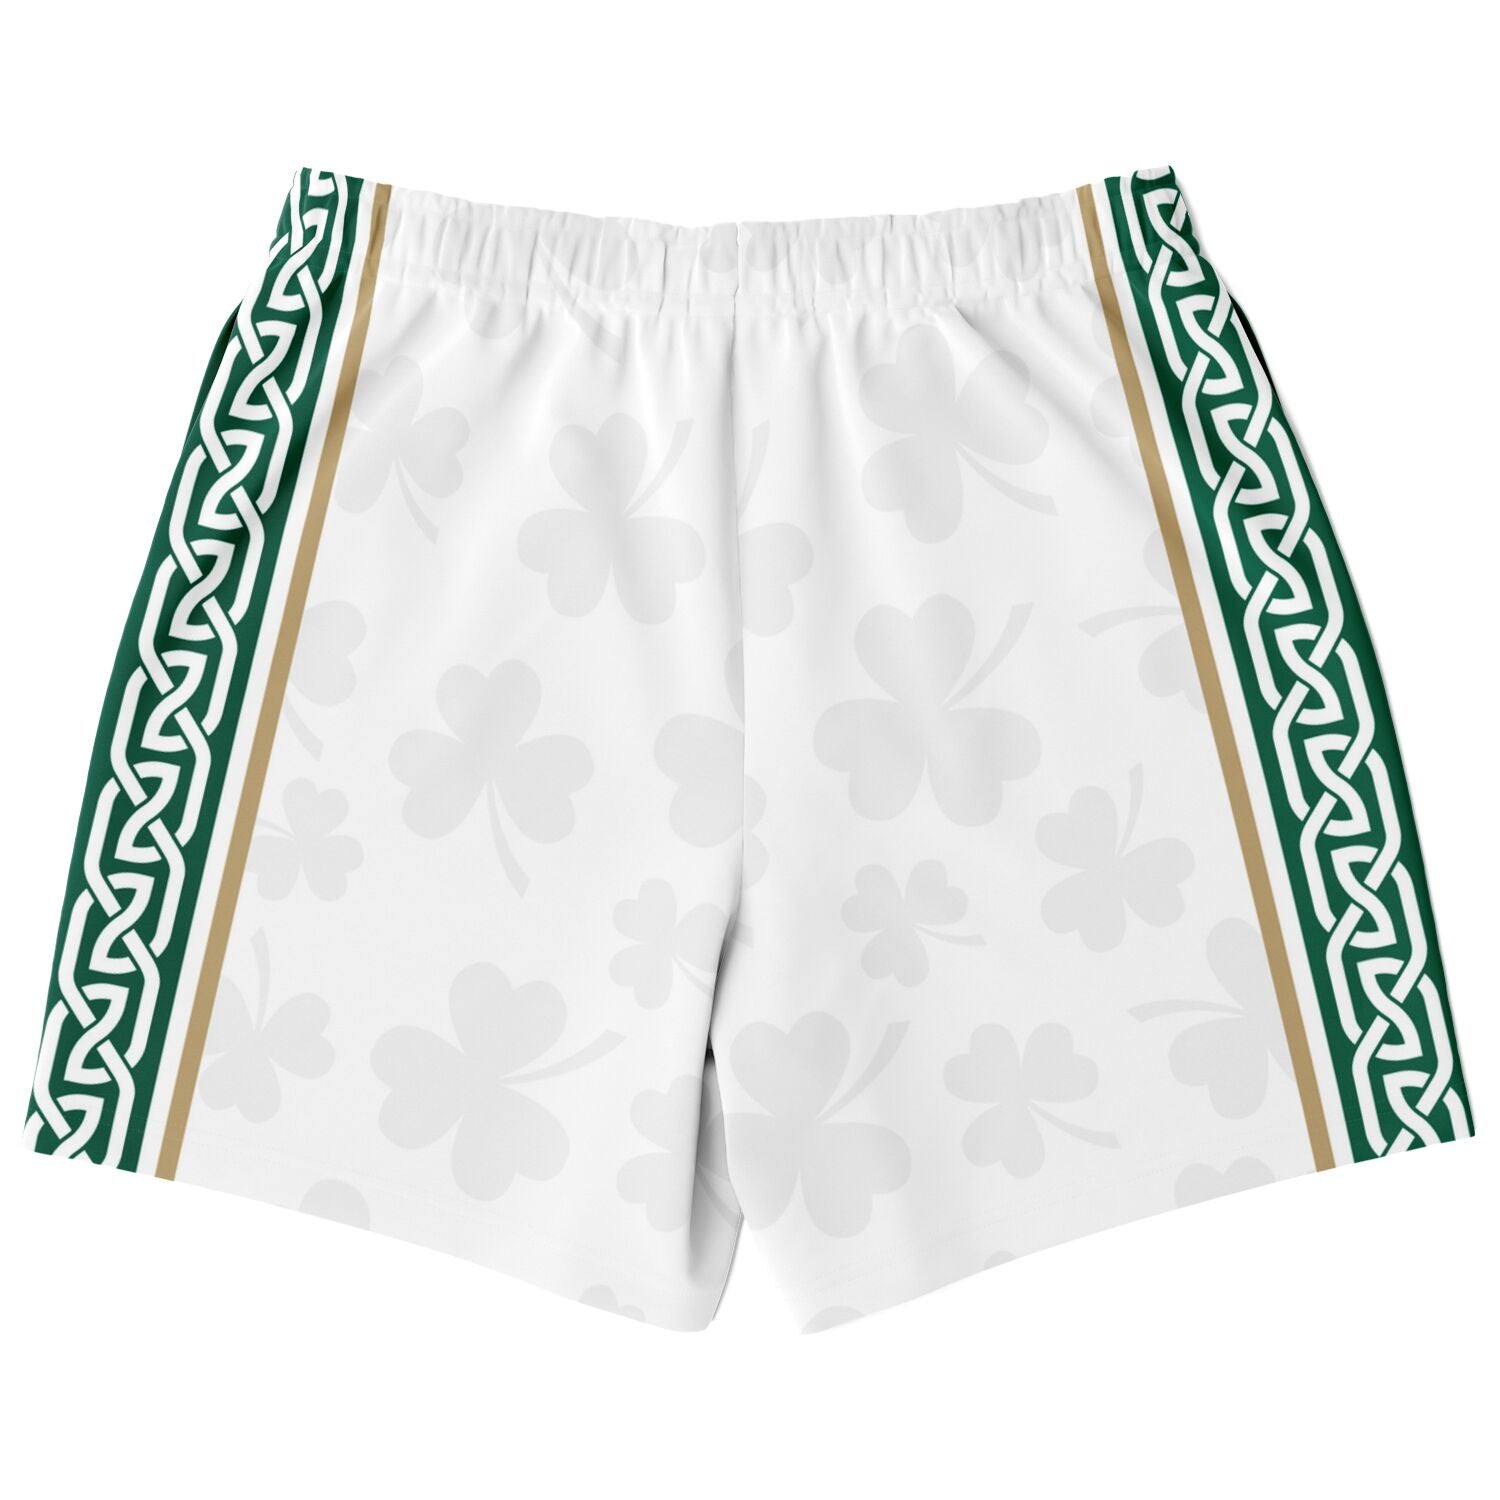 DearBBall Fashion Short - SMOOTH 0 Trèfles White Edition